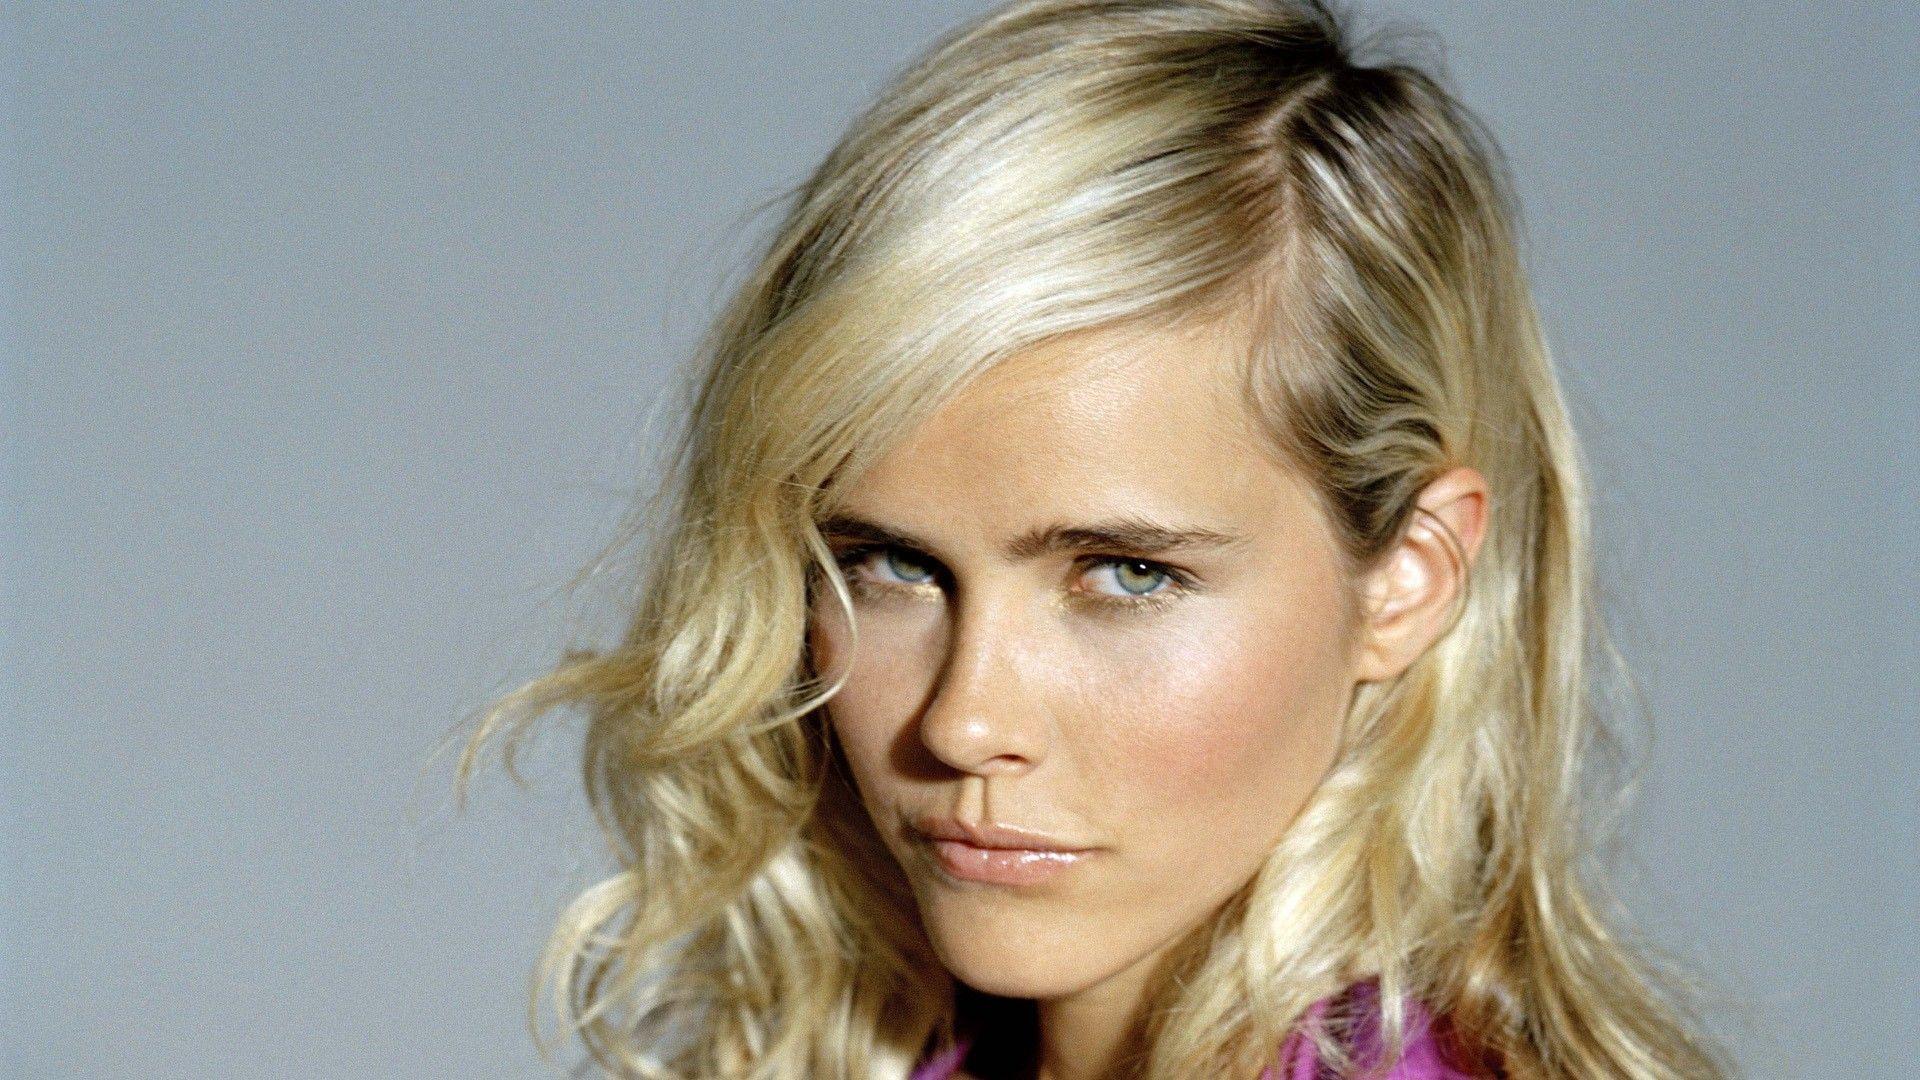 Isabel Lucas Wallpaper. Daily inspiration art photo, picture